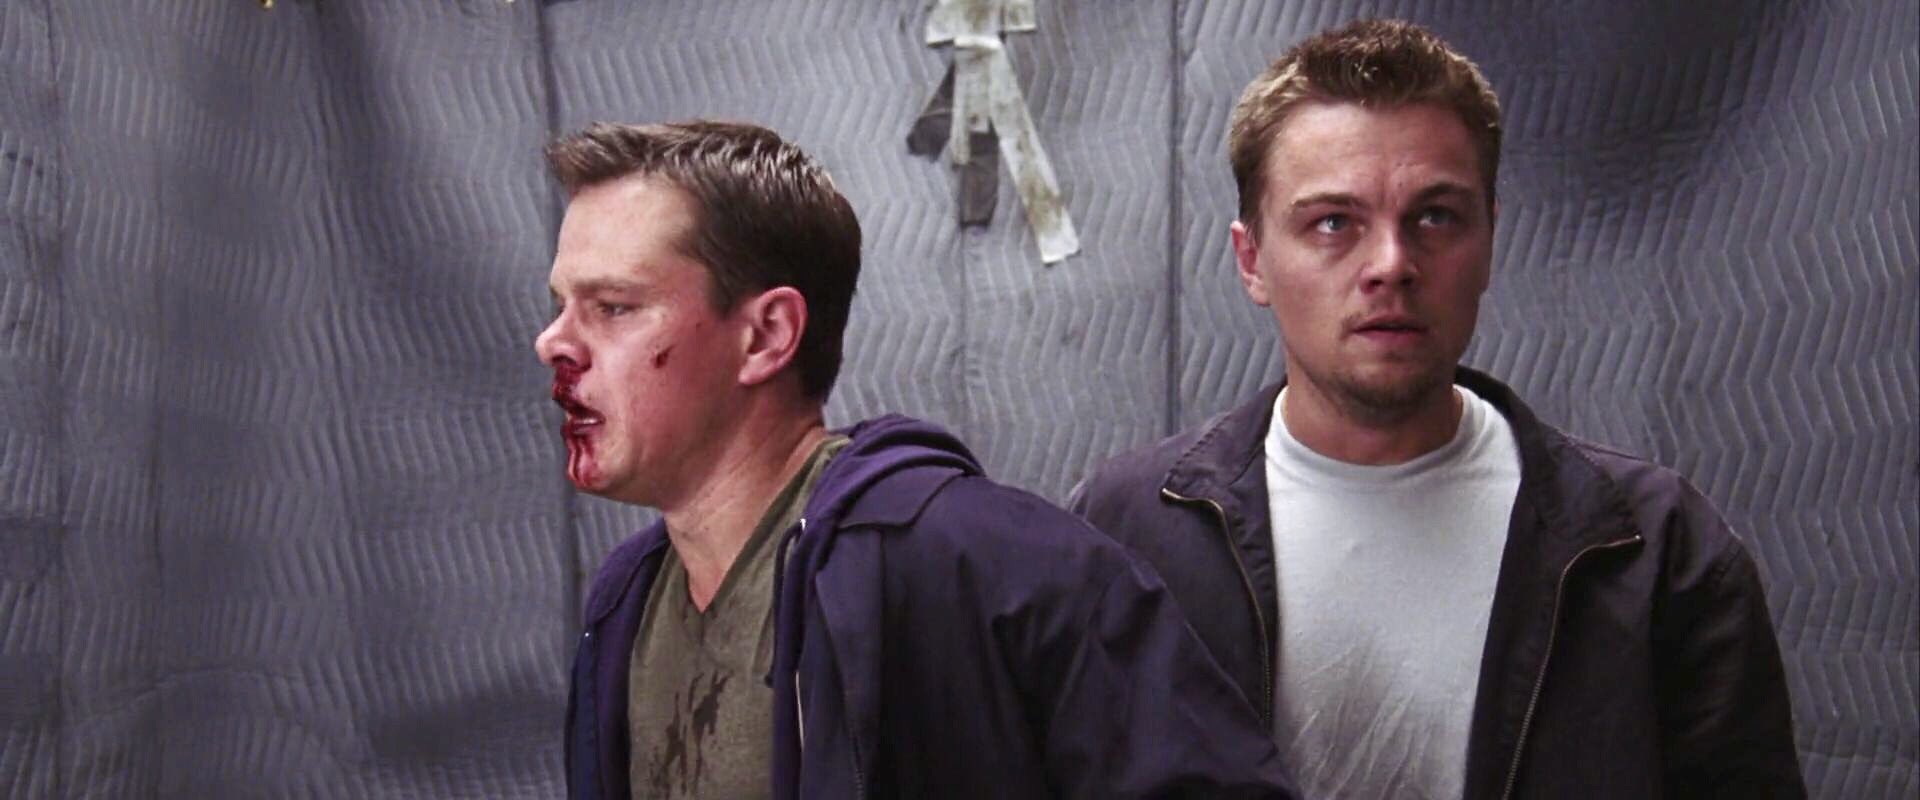 movies with sad endings  - The Departed